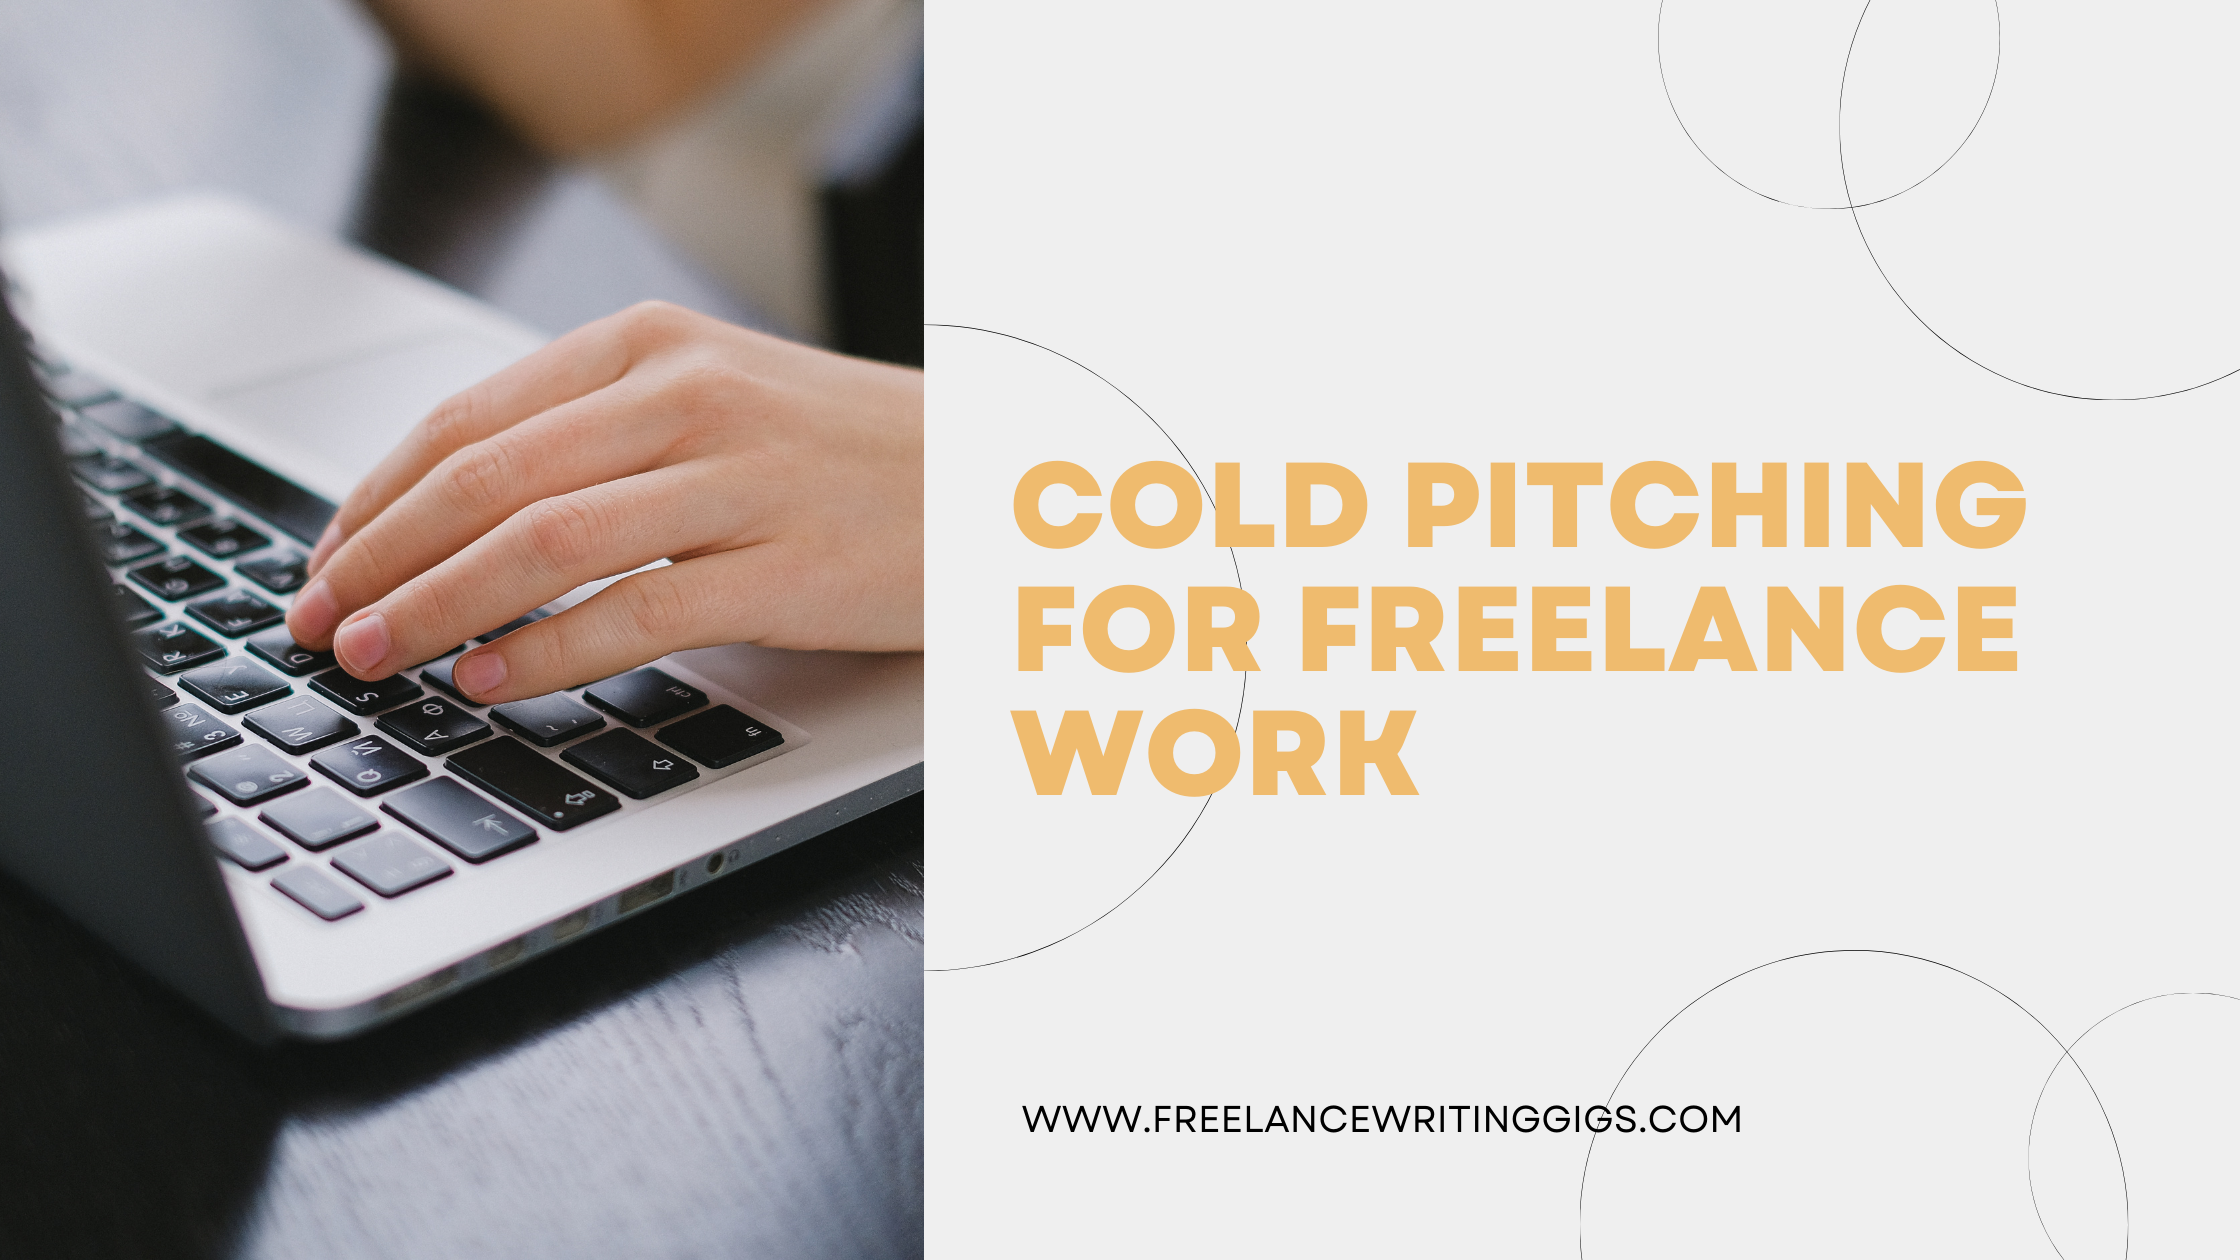 Cold Pitching for Freelance Work: Should You Do It?